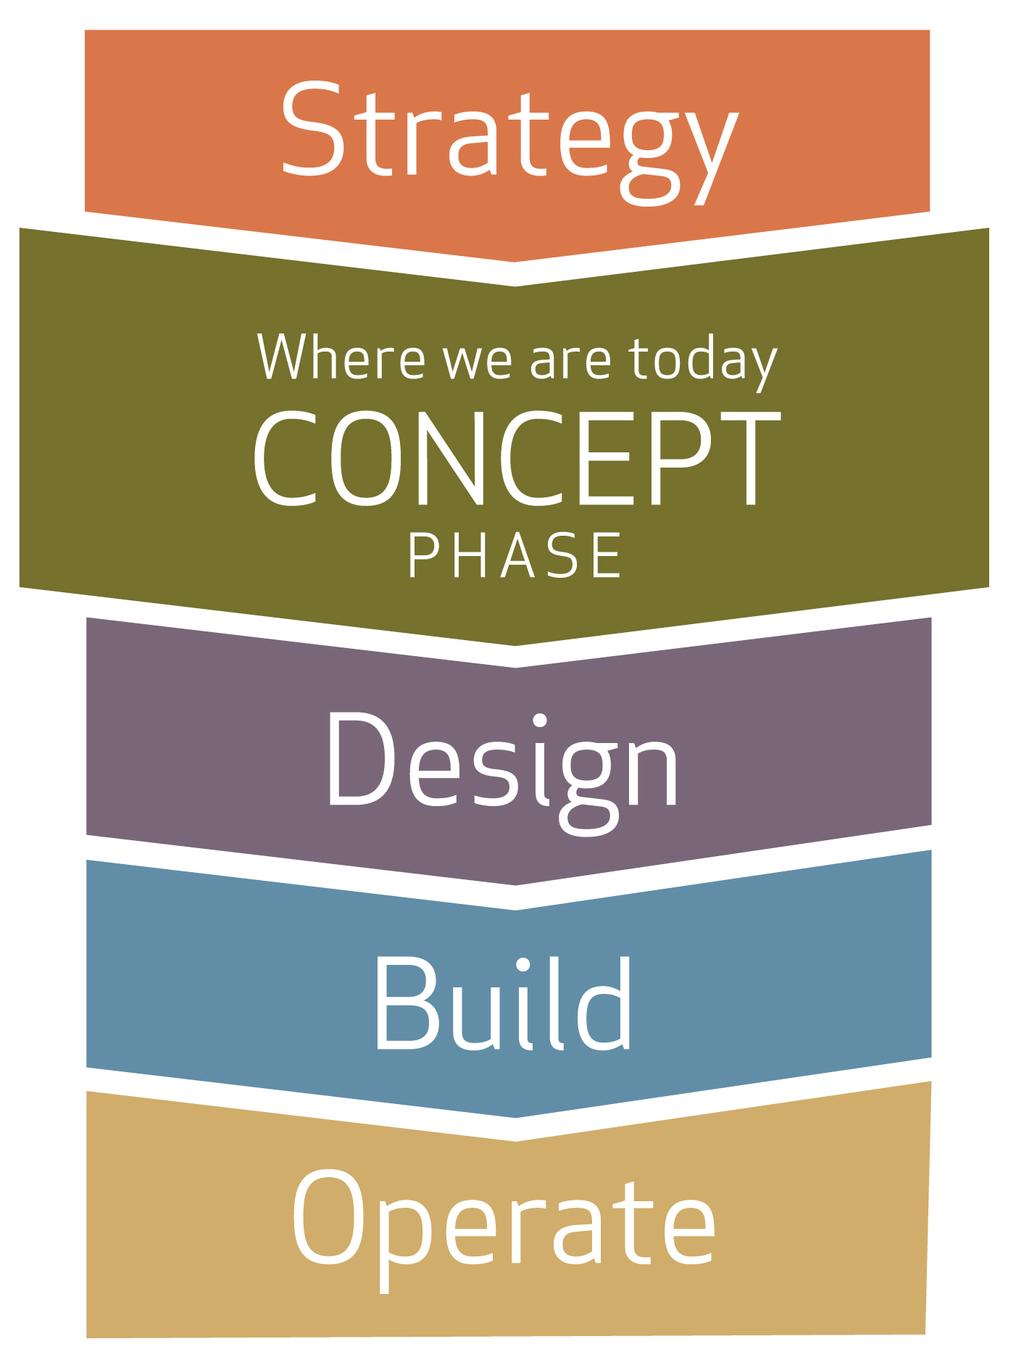 Project Timeline Concept Plan Development: 2015 Concept Plan Completion: Early 2016